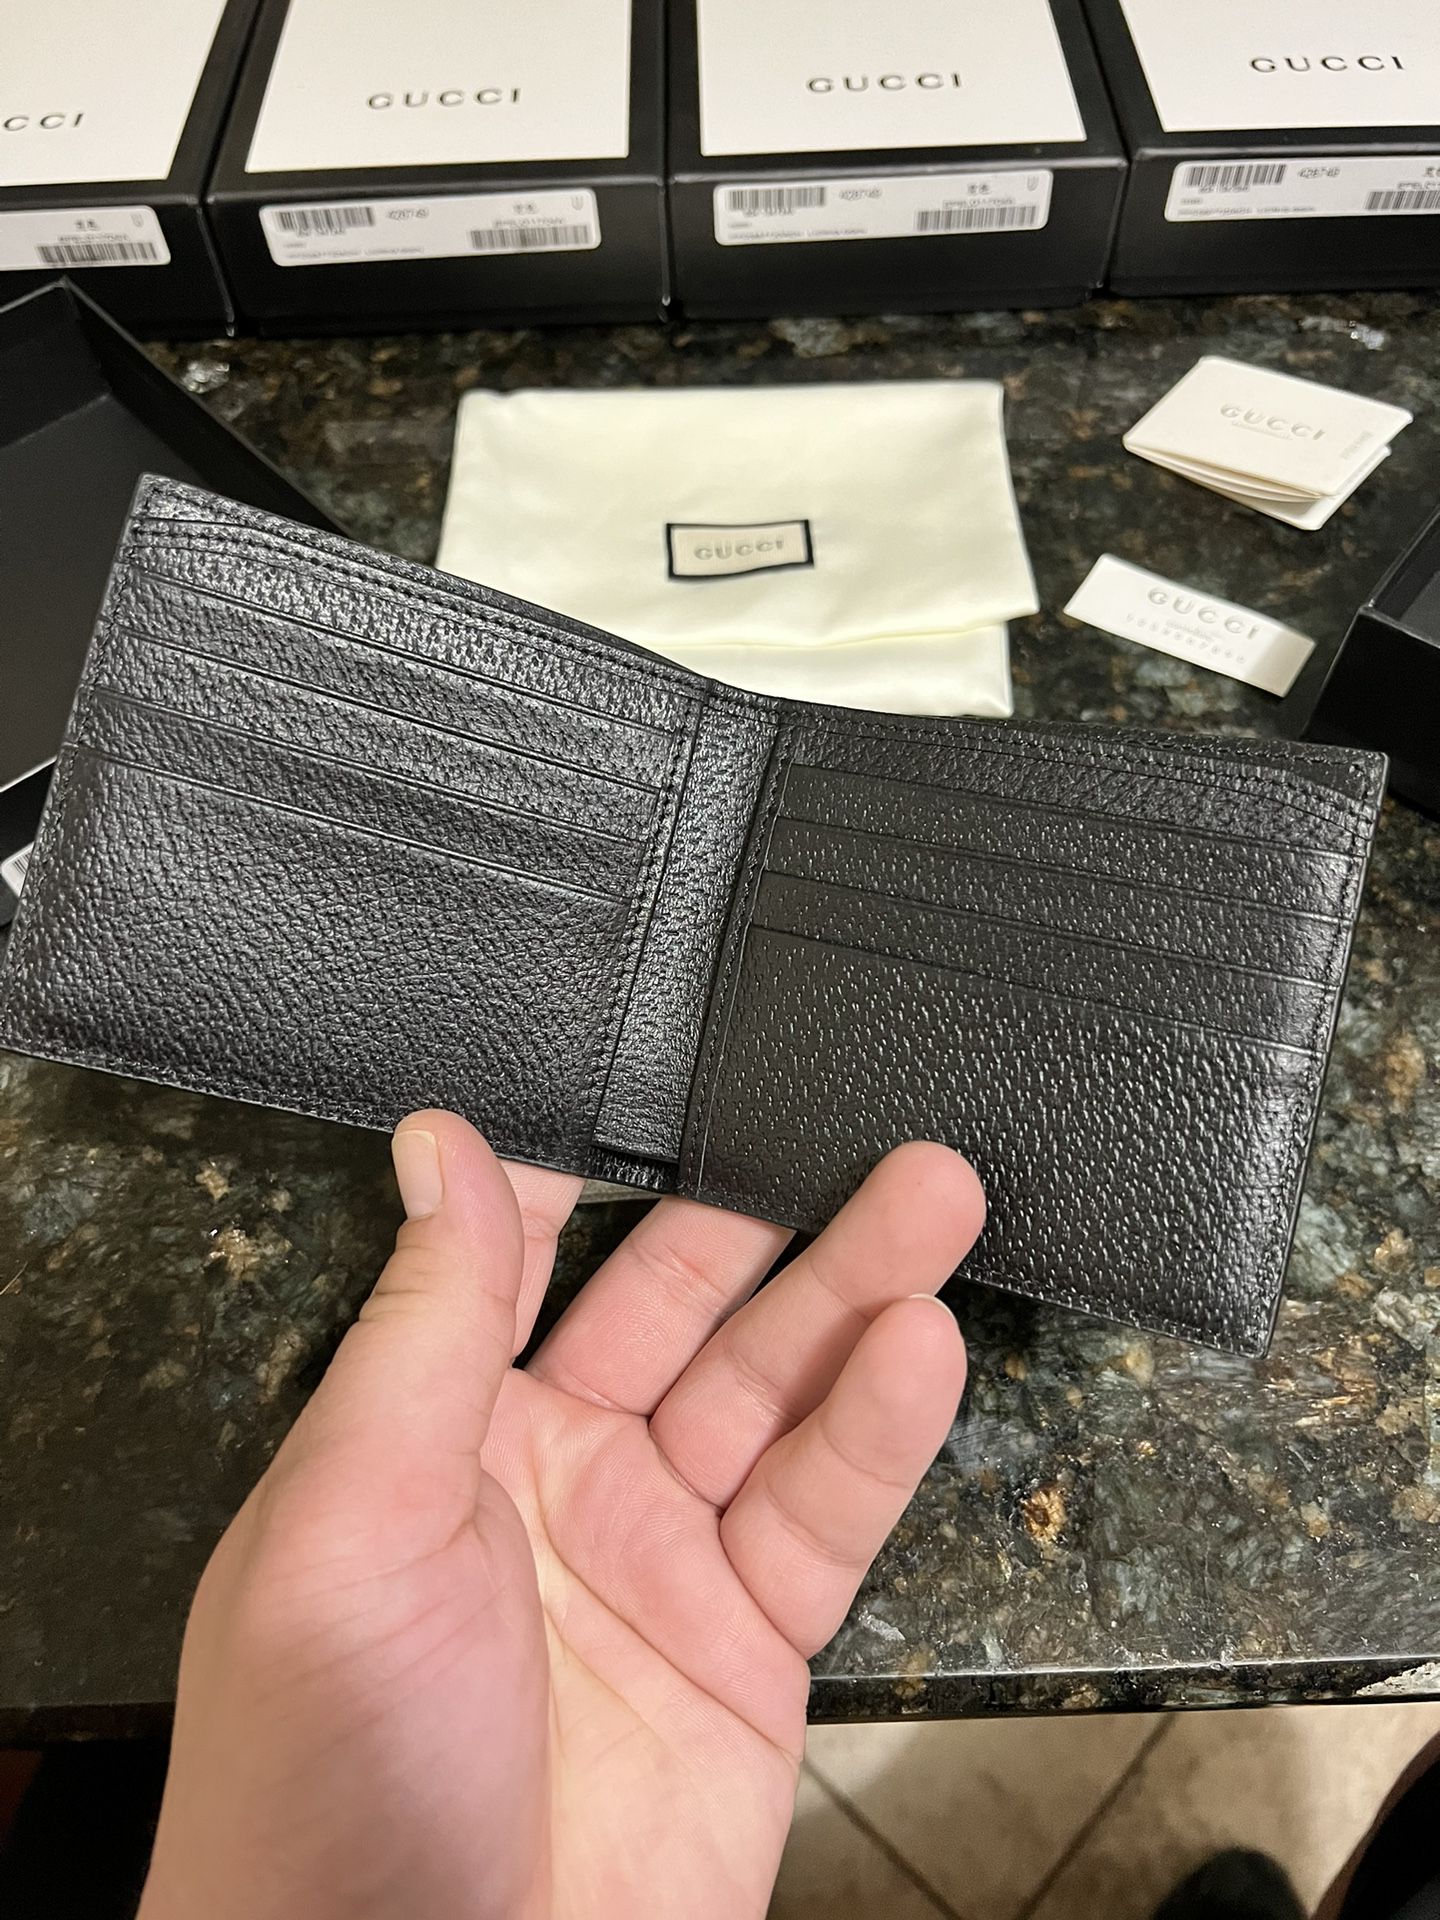 Michael Kors Wallet Men for Sale in Cohoes, NY - OfferUp